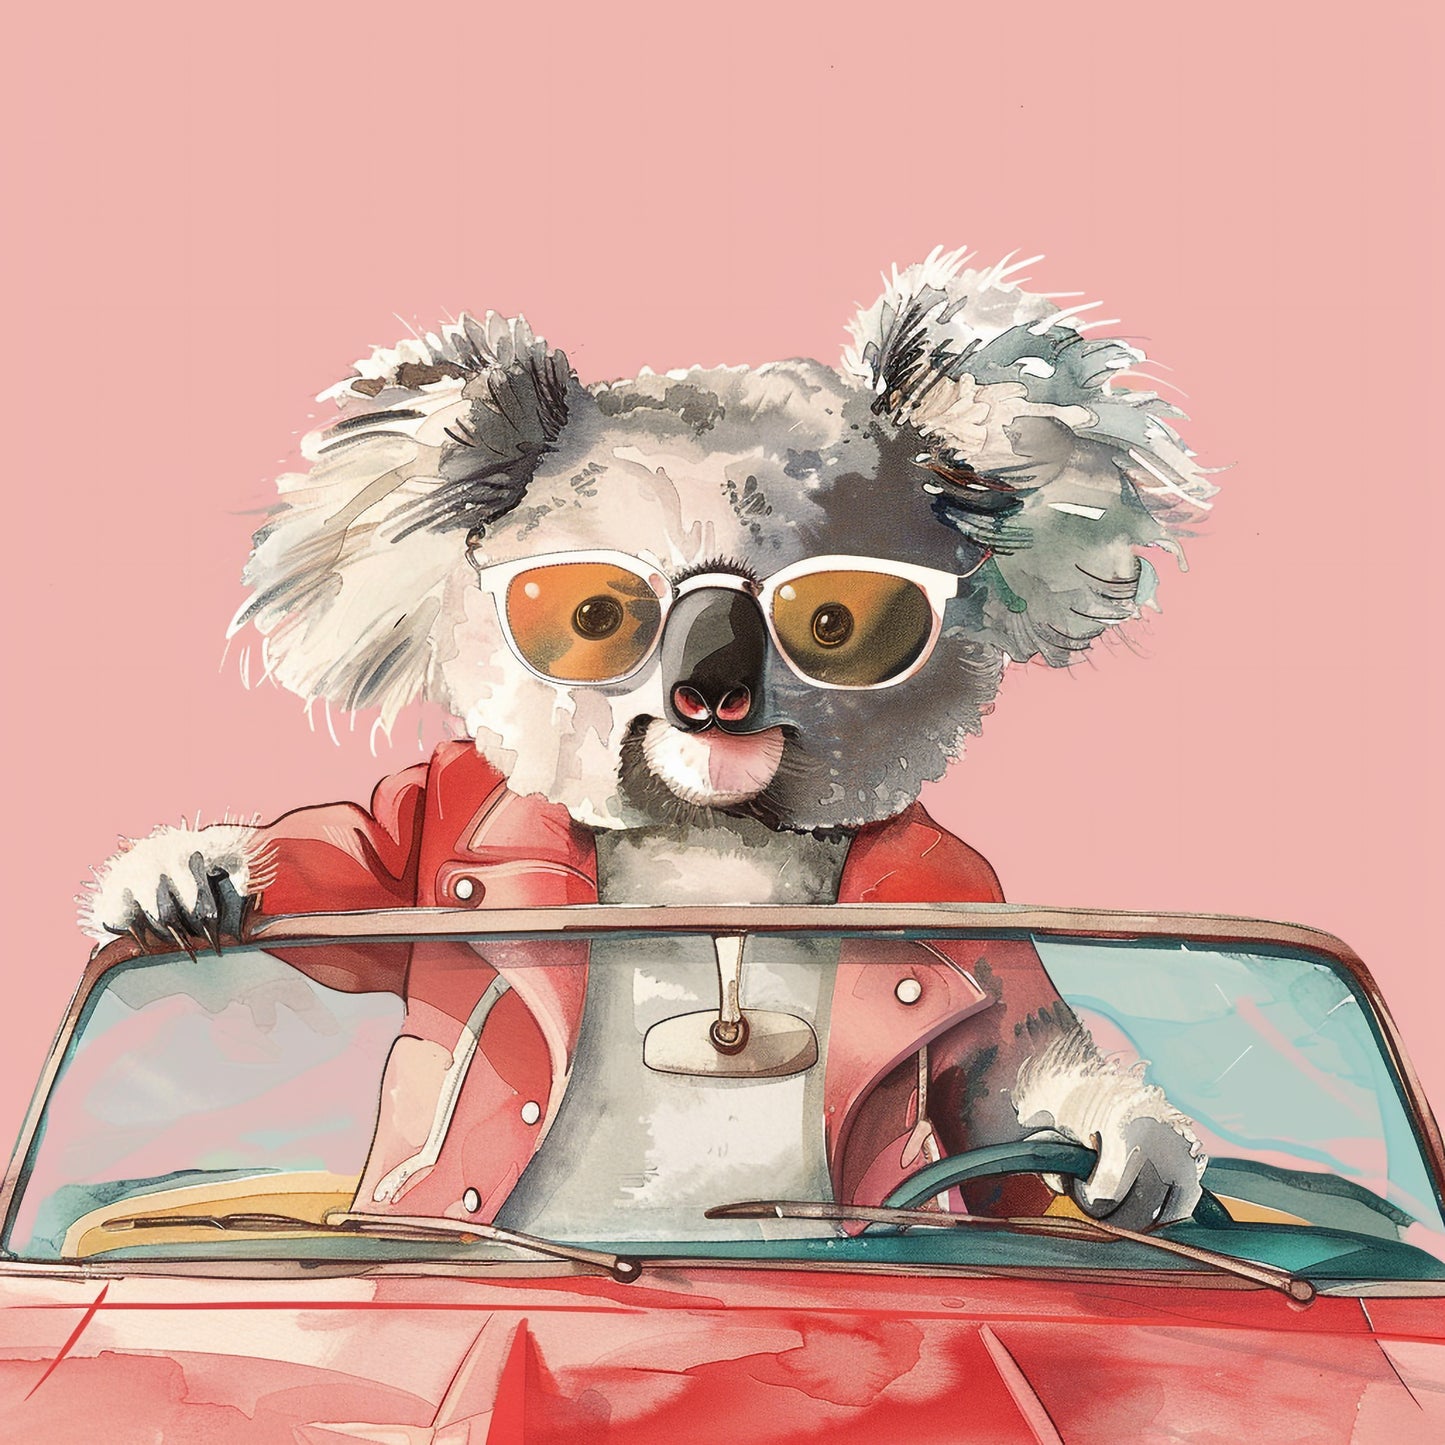 Stylish Koala in Retro Outfit Driving a Vintage Convertible